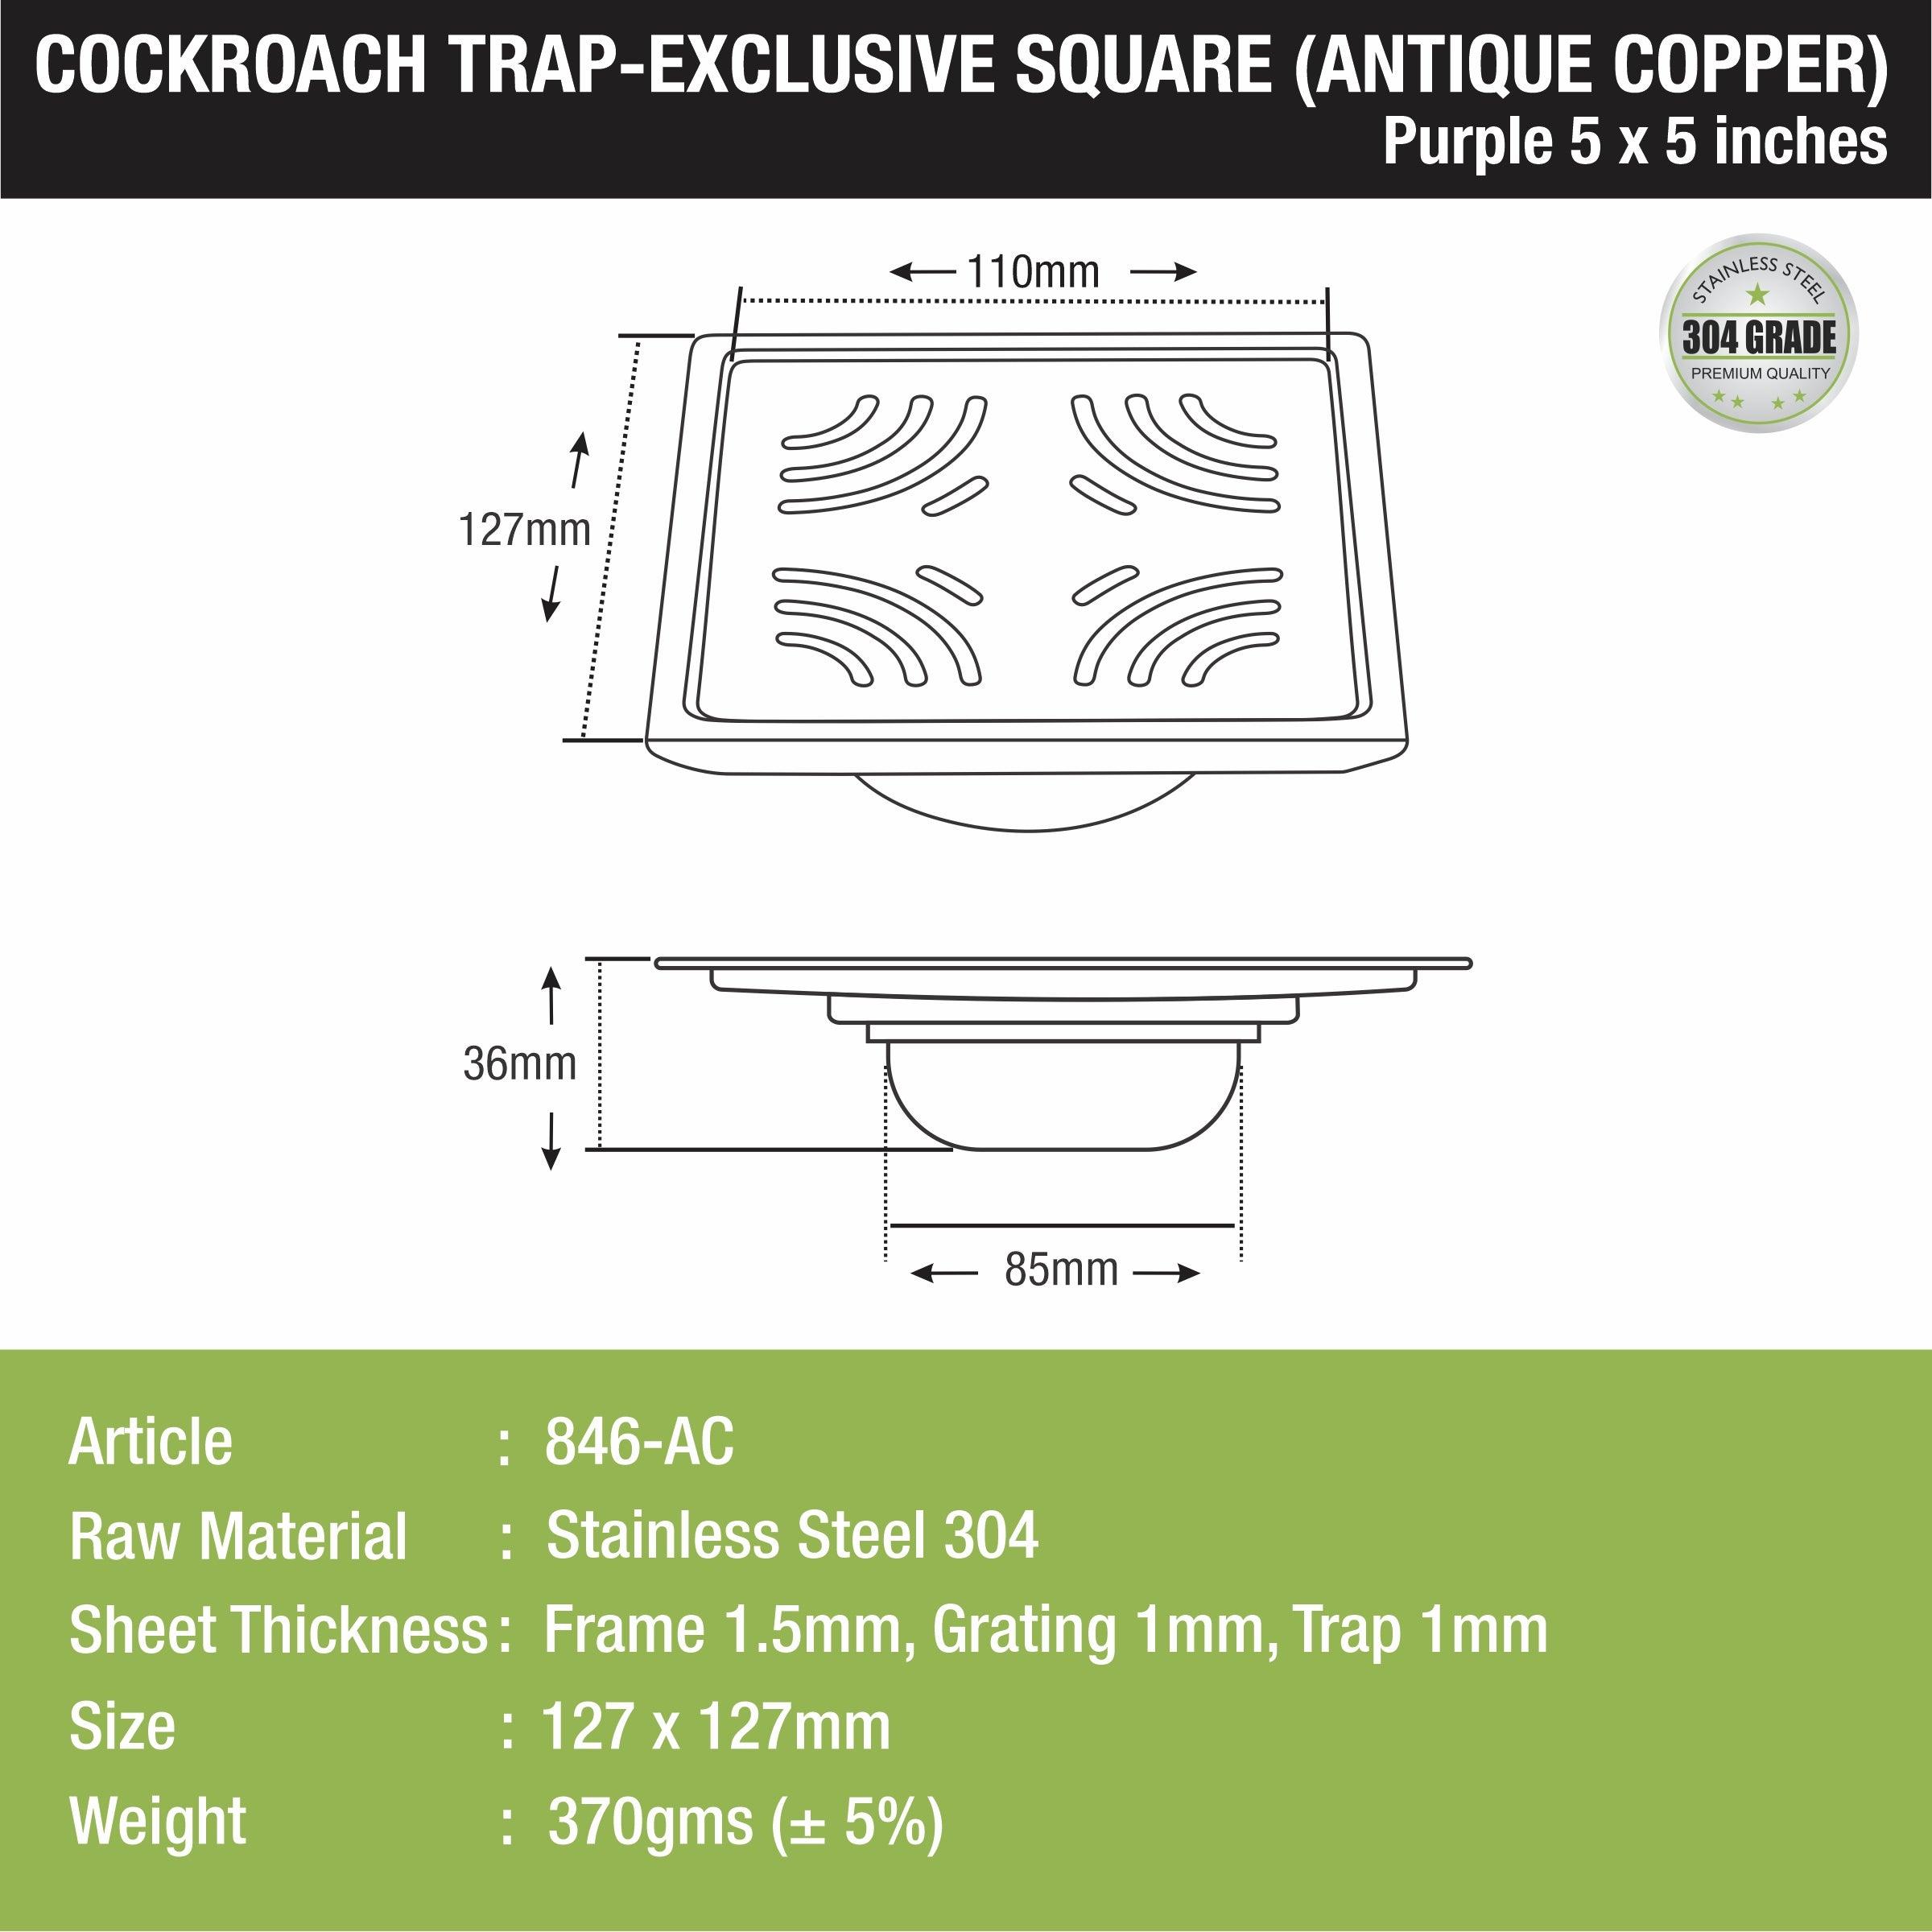 Purple Exclusive Square Floor Drain in Antique Copper PVD Coating (5 x 5 Inches) with Cockroach Trap - LIPKA